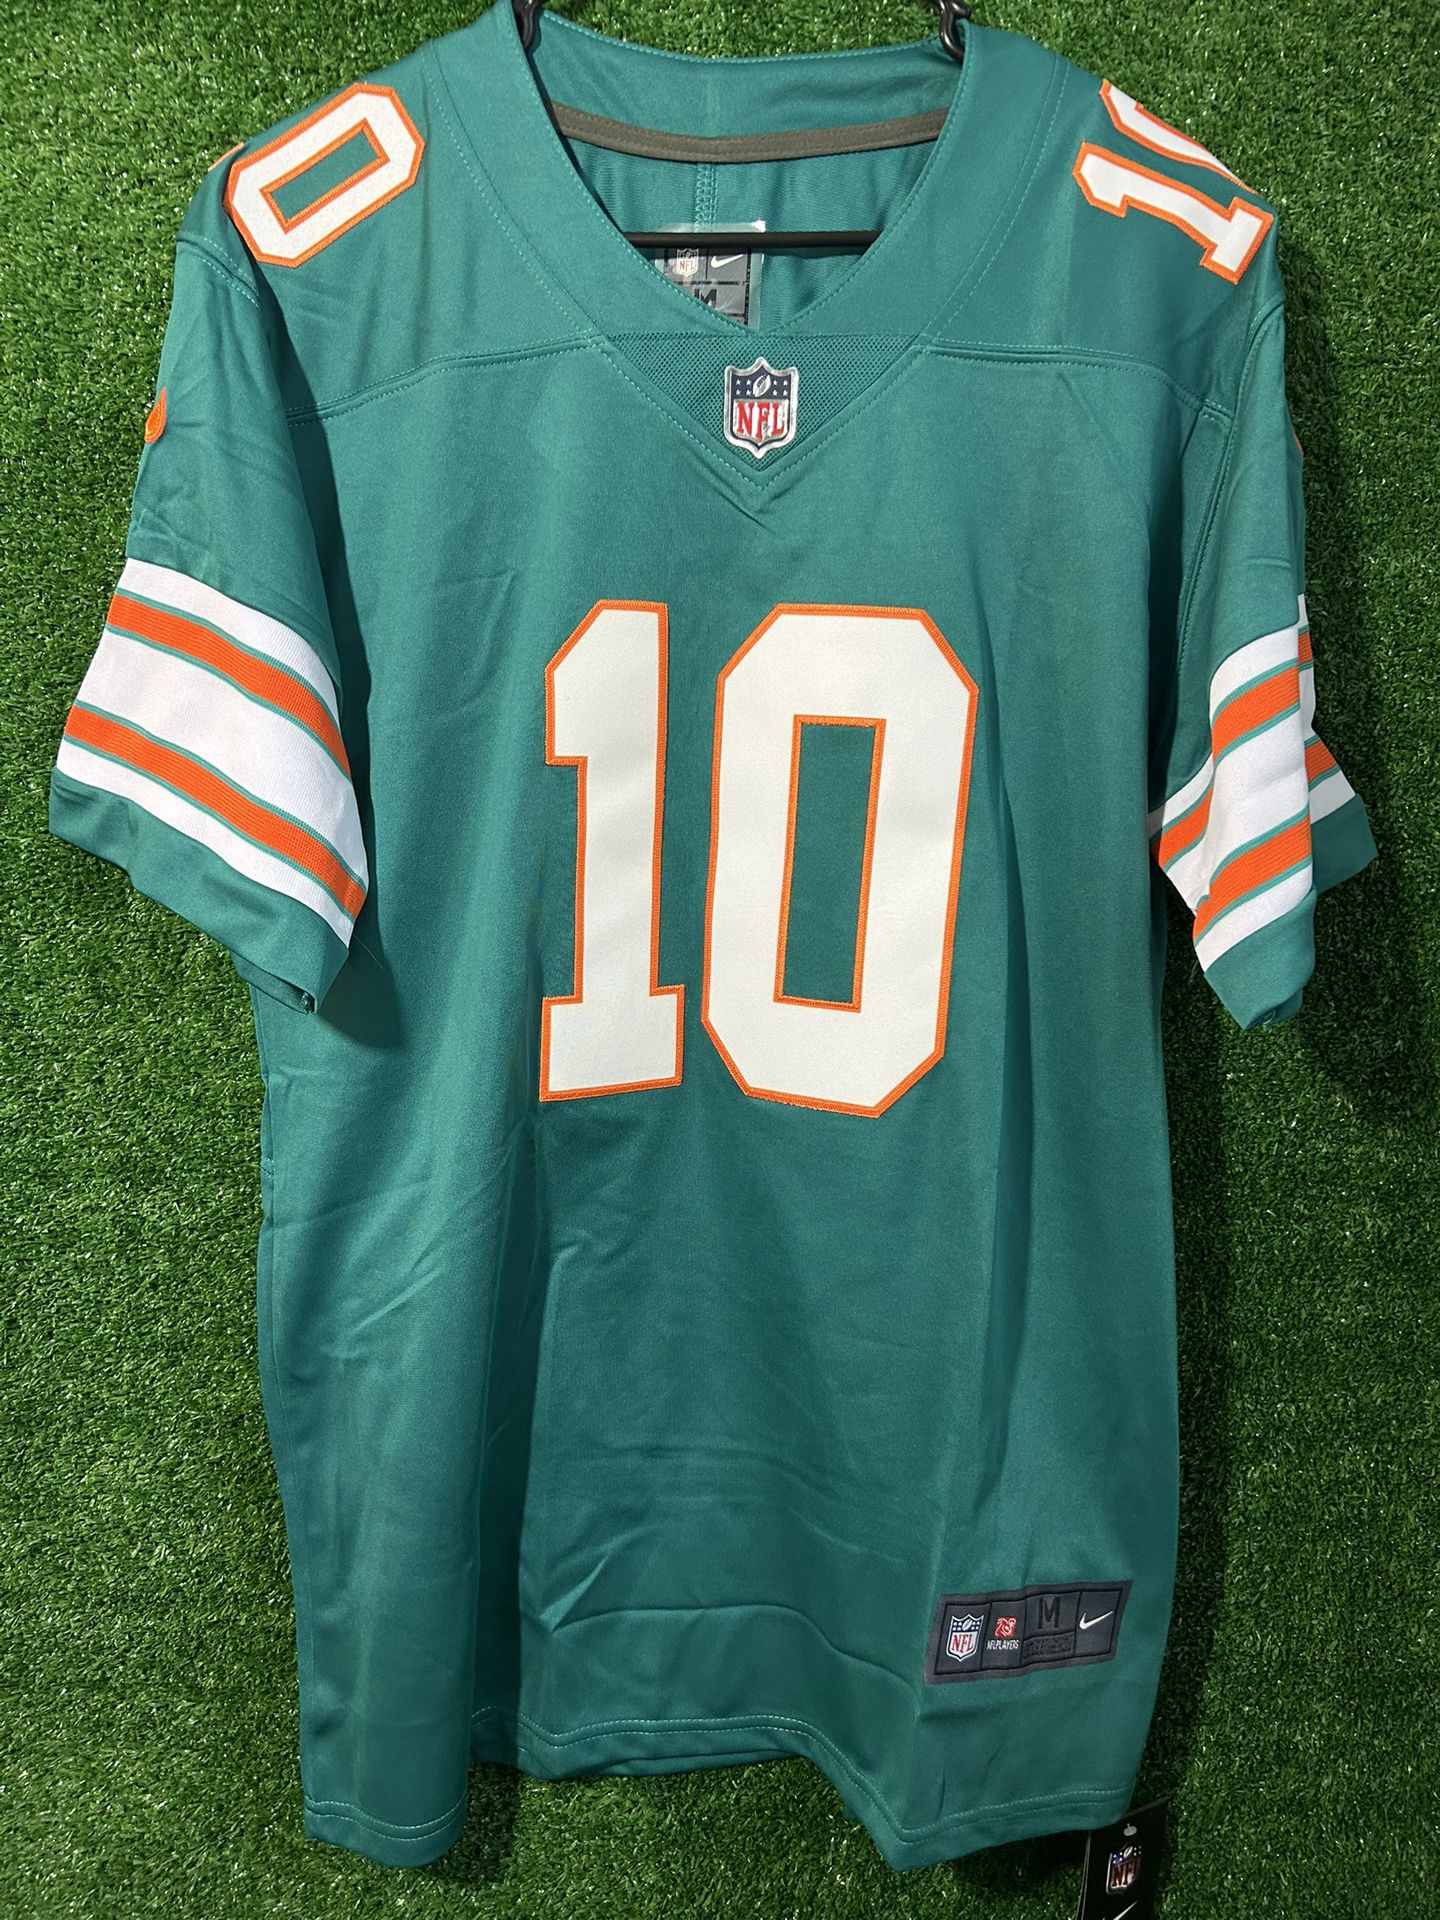 TYREEK HILL MIAMI DOLPHINS NIKE JERSEY BRAND NEW WITH TAGS SIZES MEDIUM AND LARGE AVAILABLE